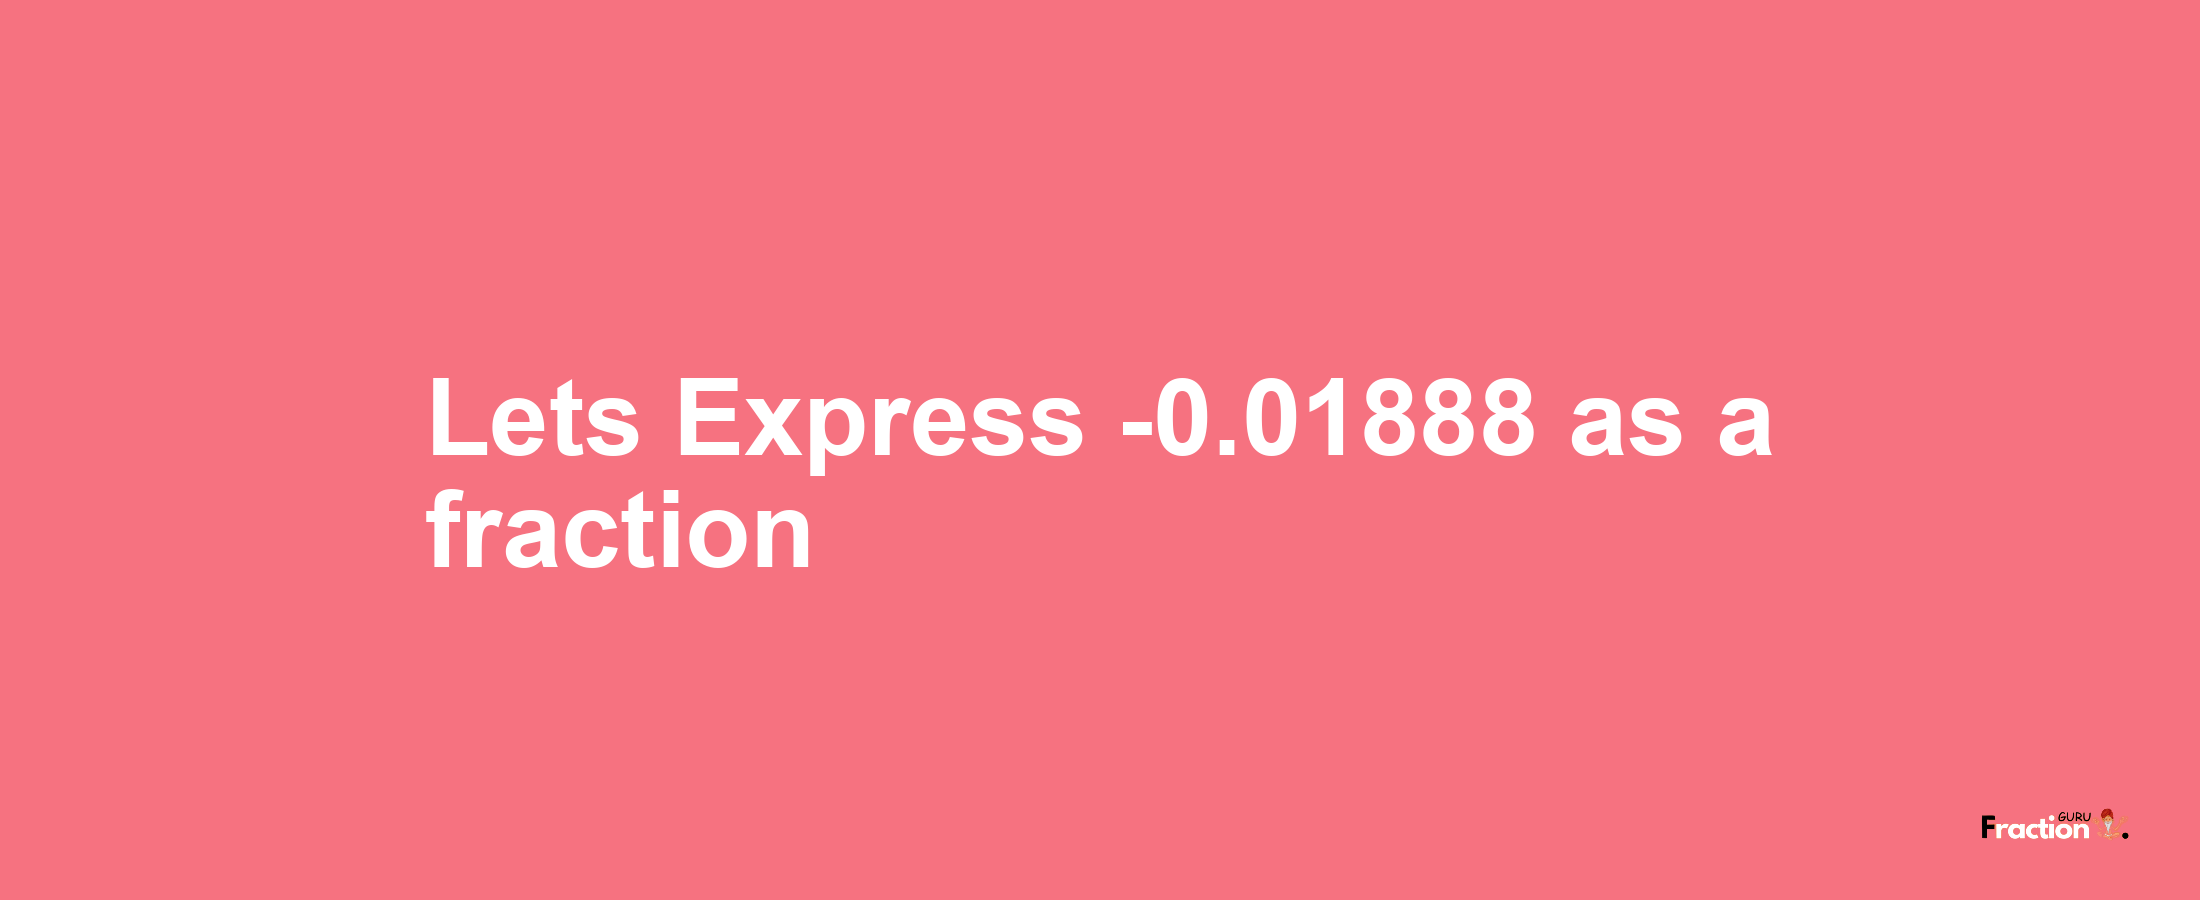 Lets Express -0.01888 as afraction